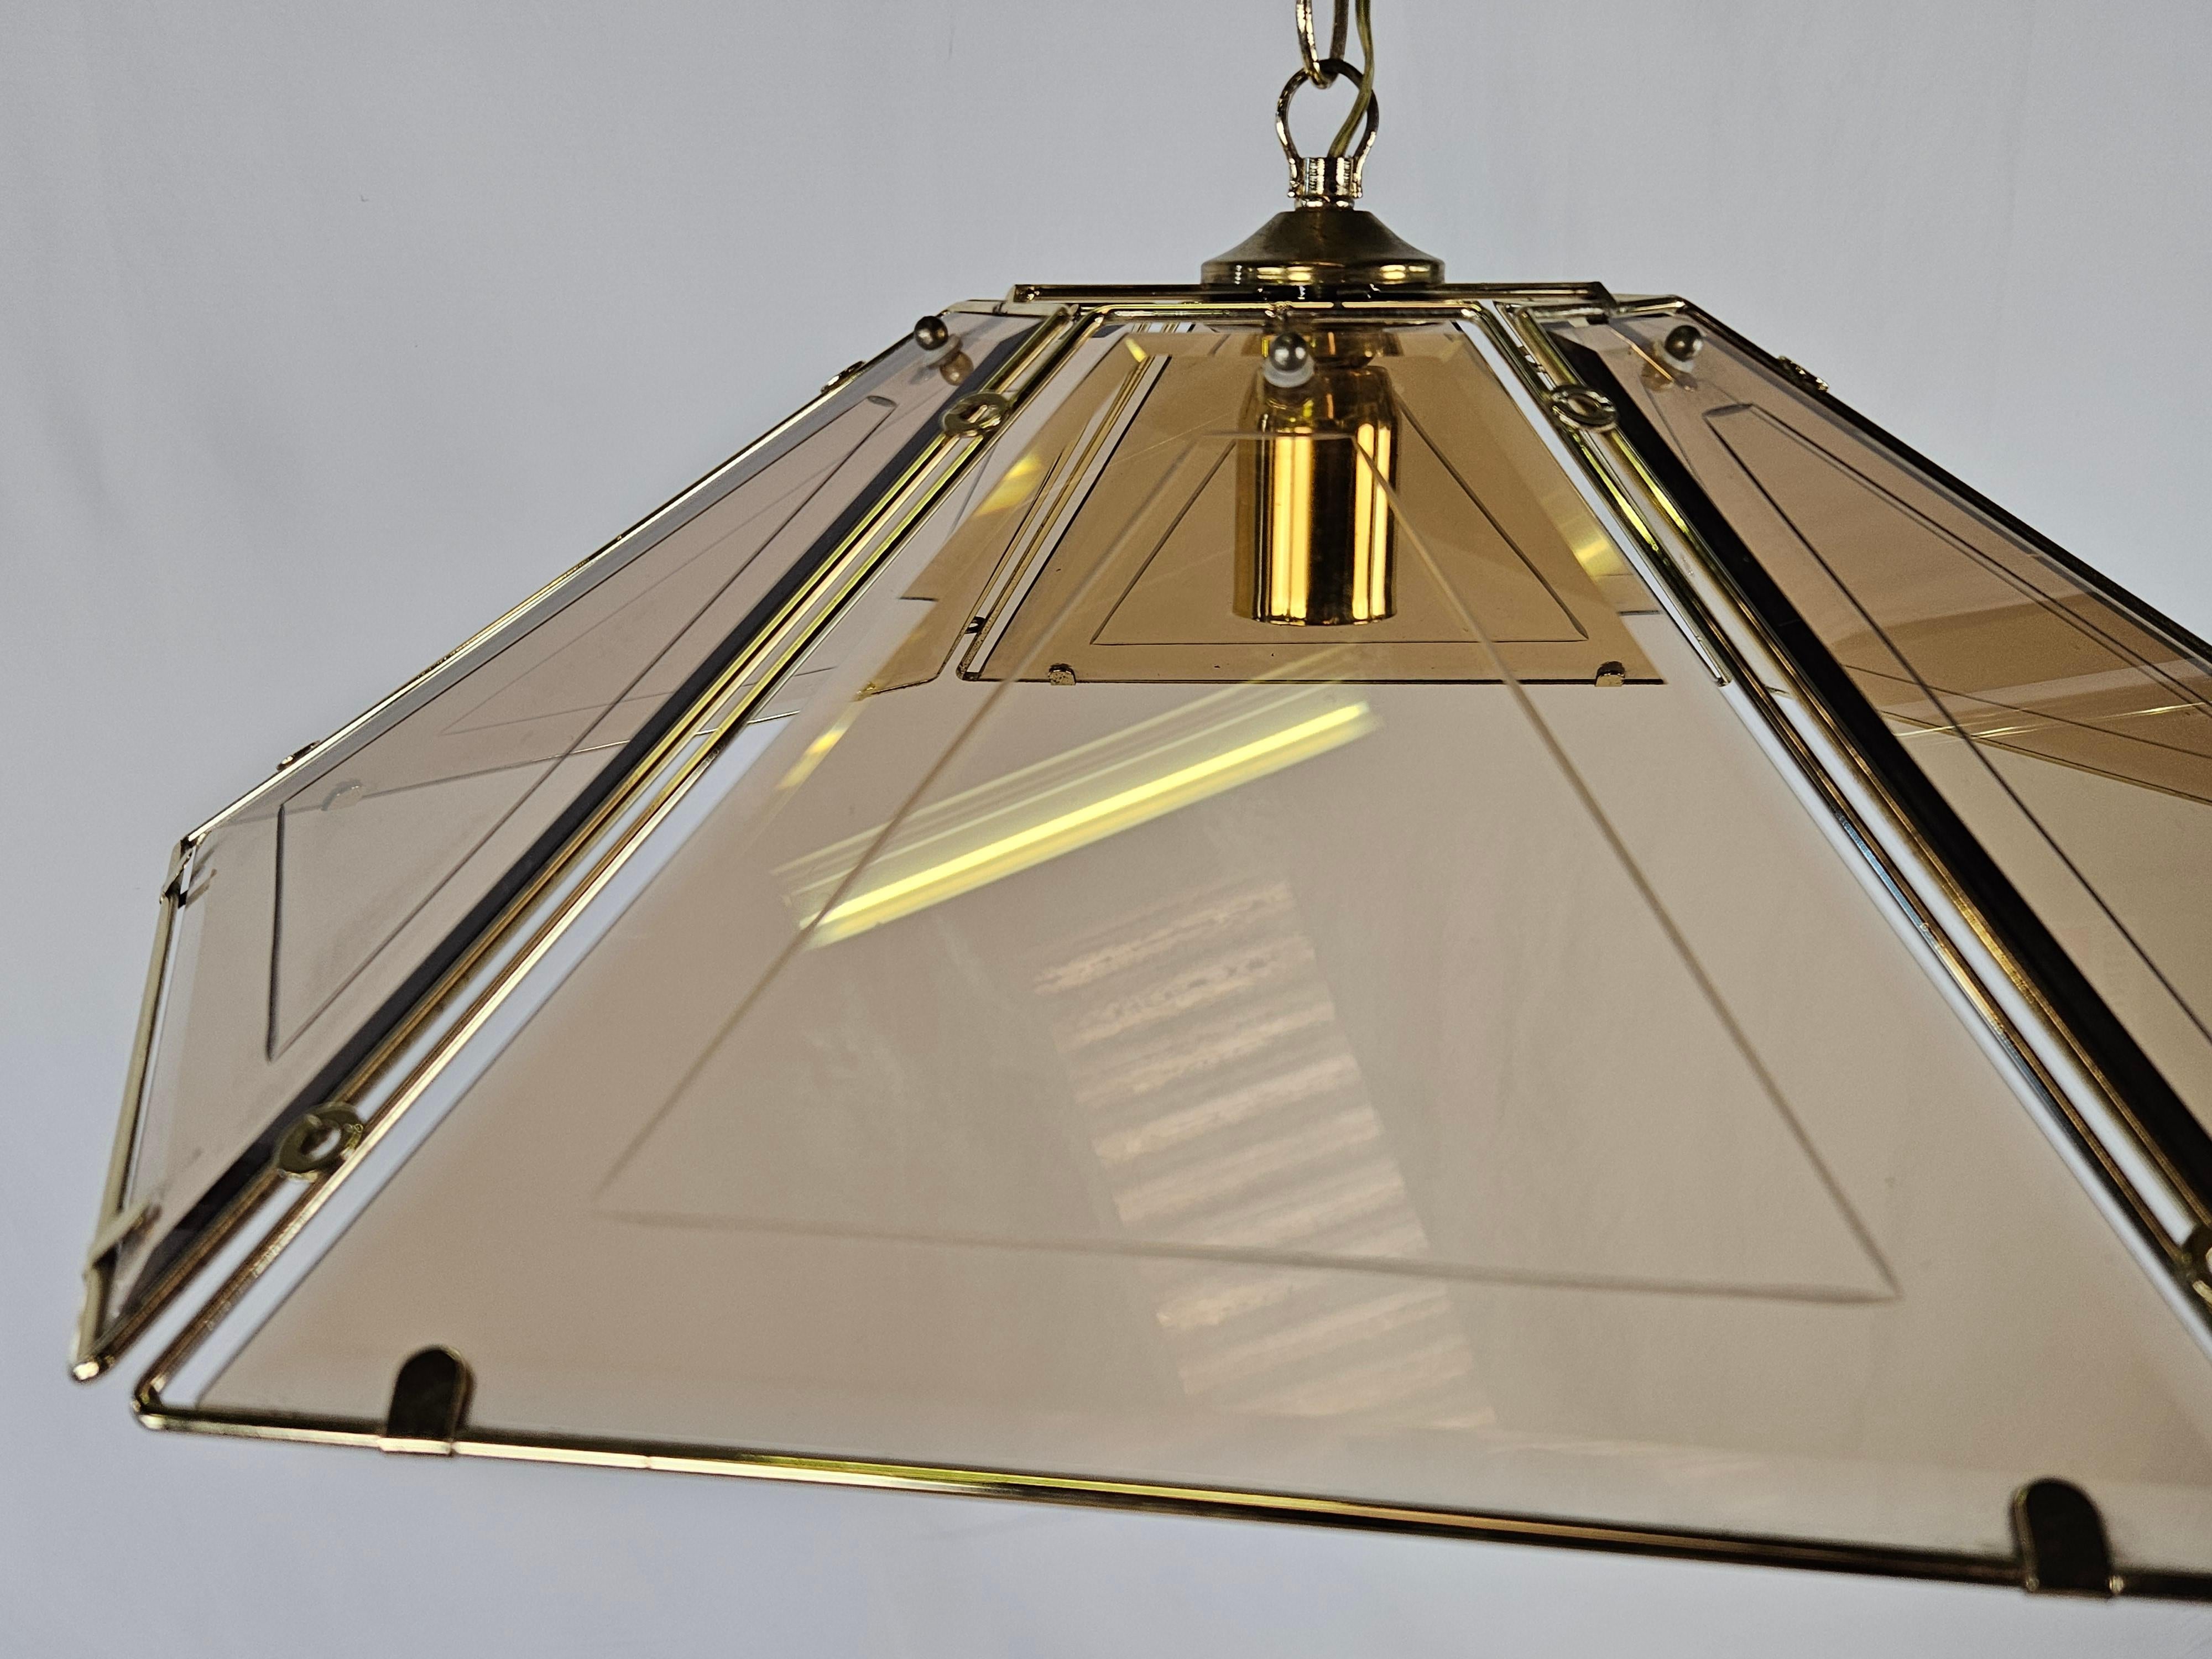 Large and distinctive hexagonal chandelier made of smoked glass and brass, suitable for modern and antique environments.

It lends itself excellently to a kitchen, living room or hall at the entrance.